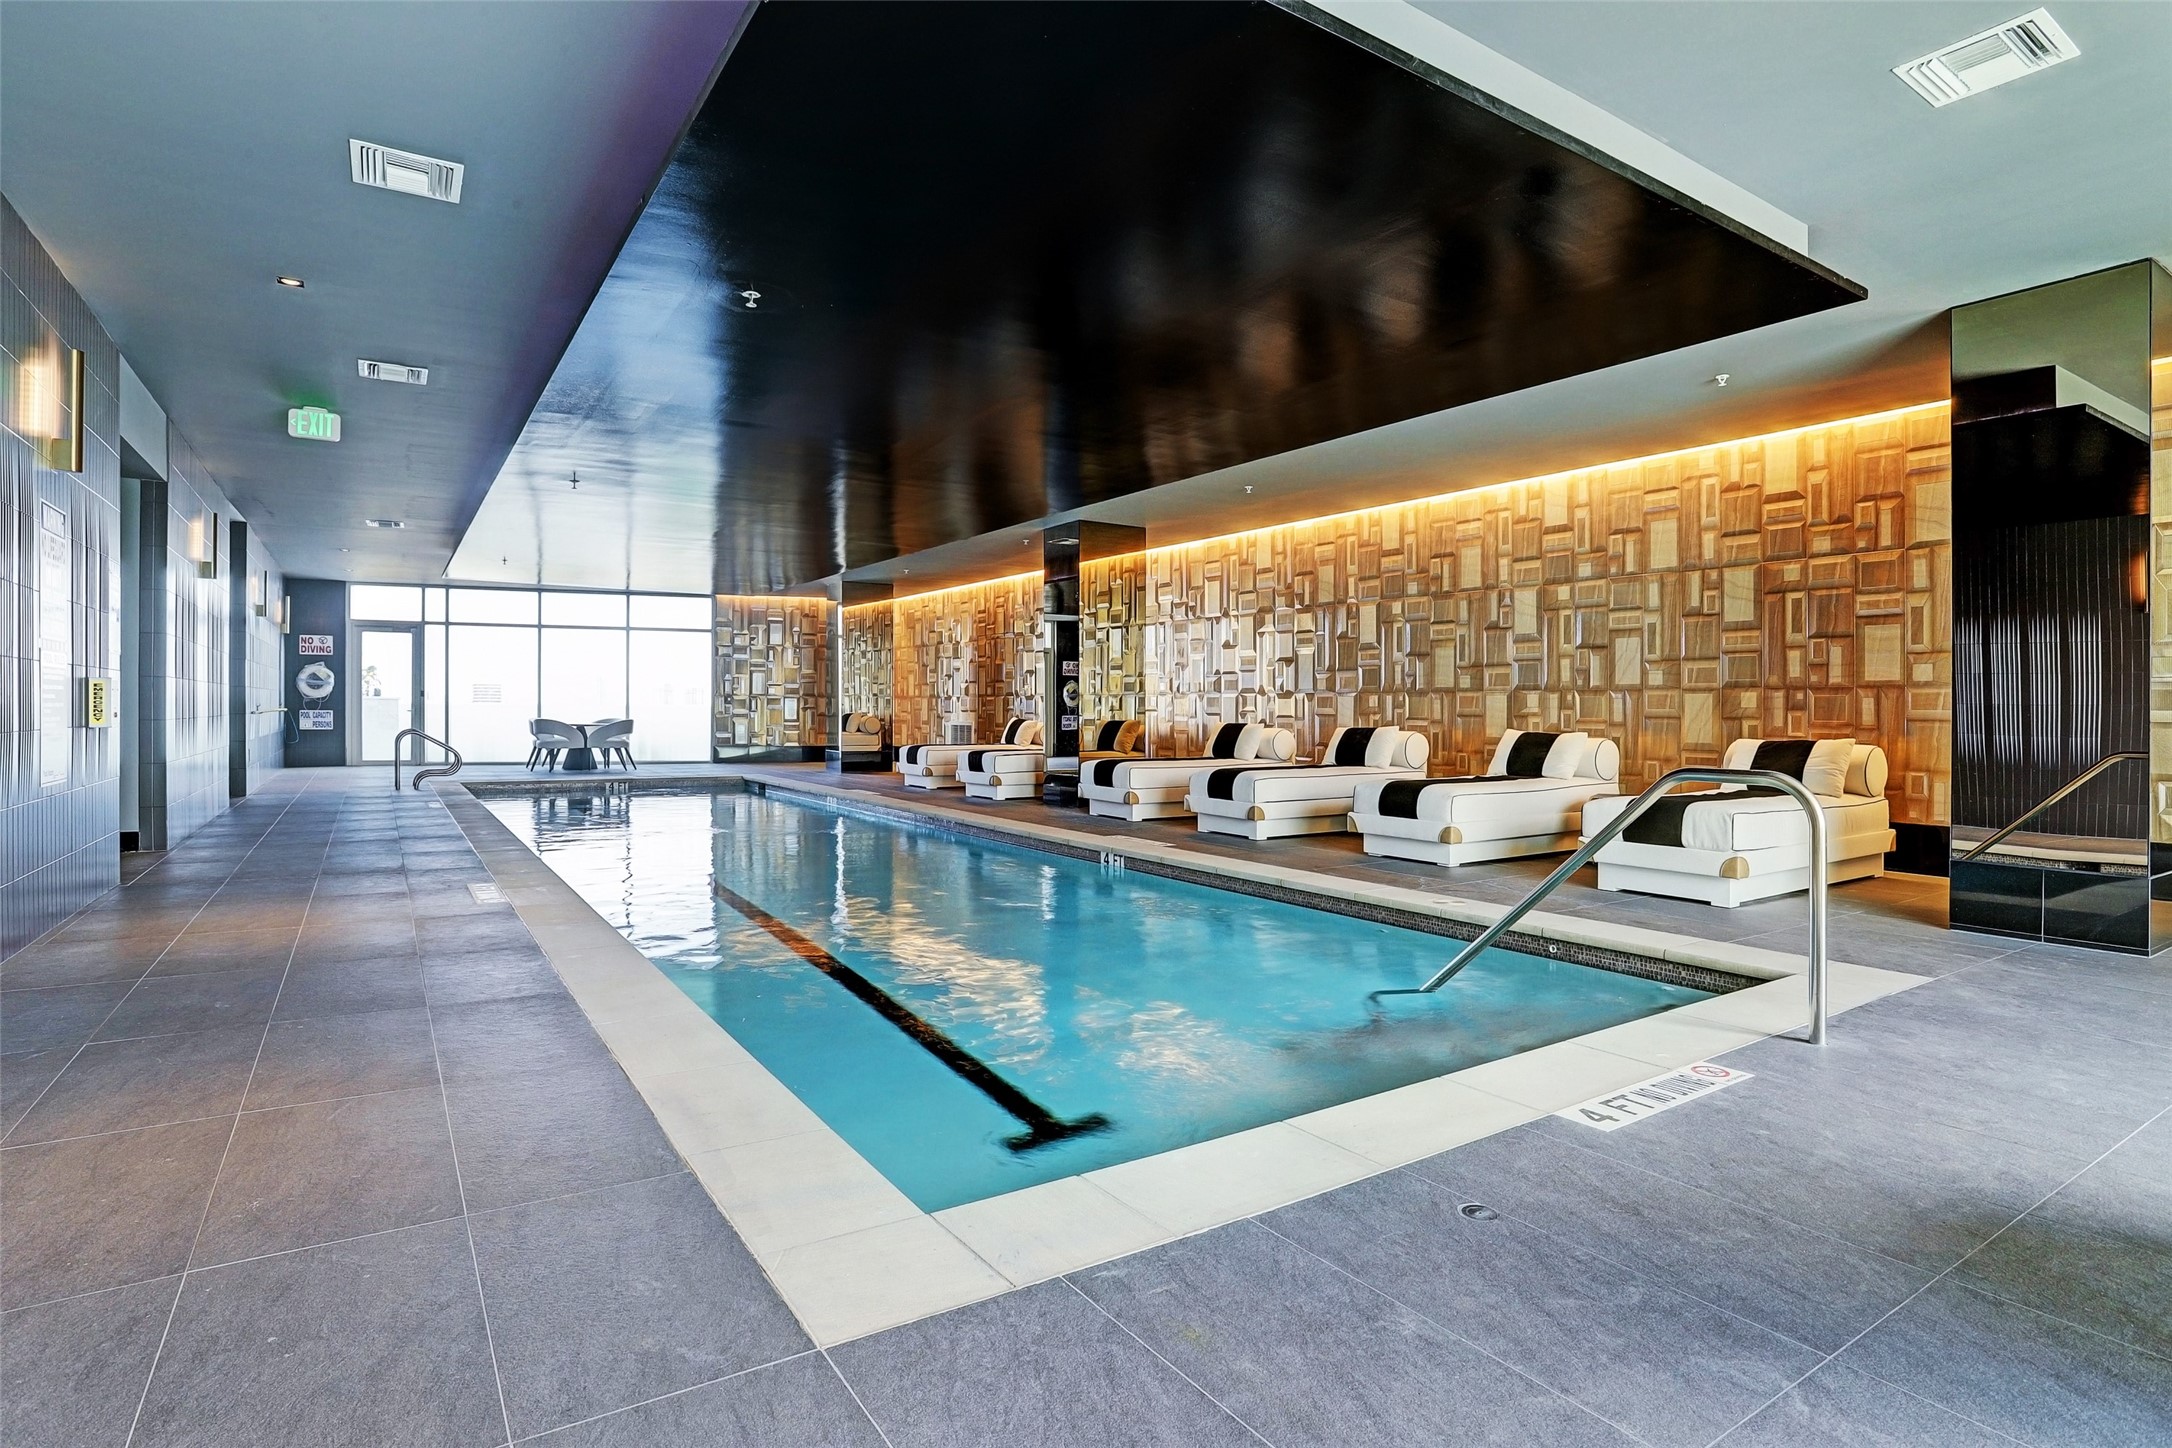 The spa-like indoor pool features walls of glass as well as easy access to a sauna, massage room and pet salon